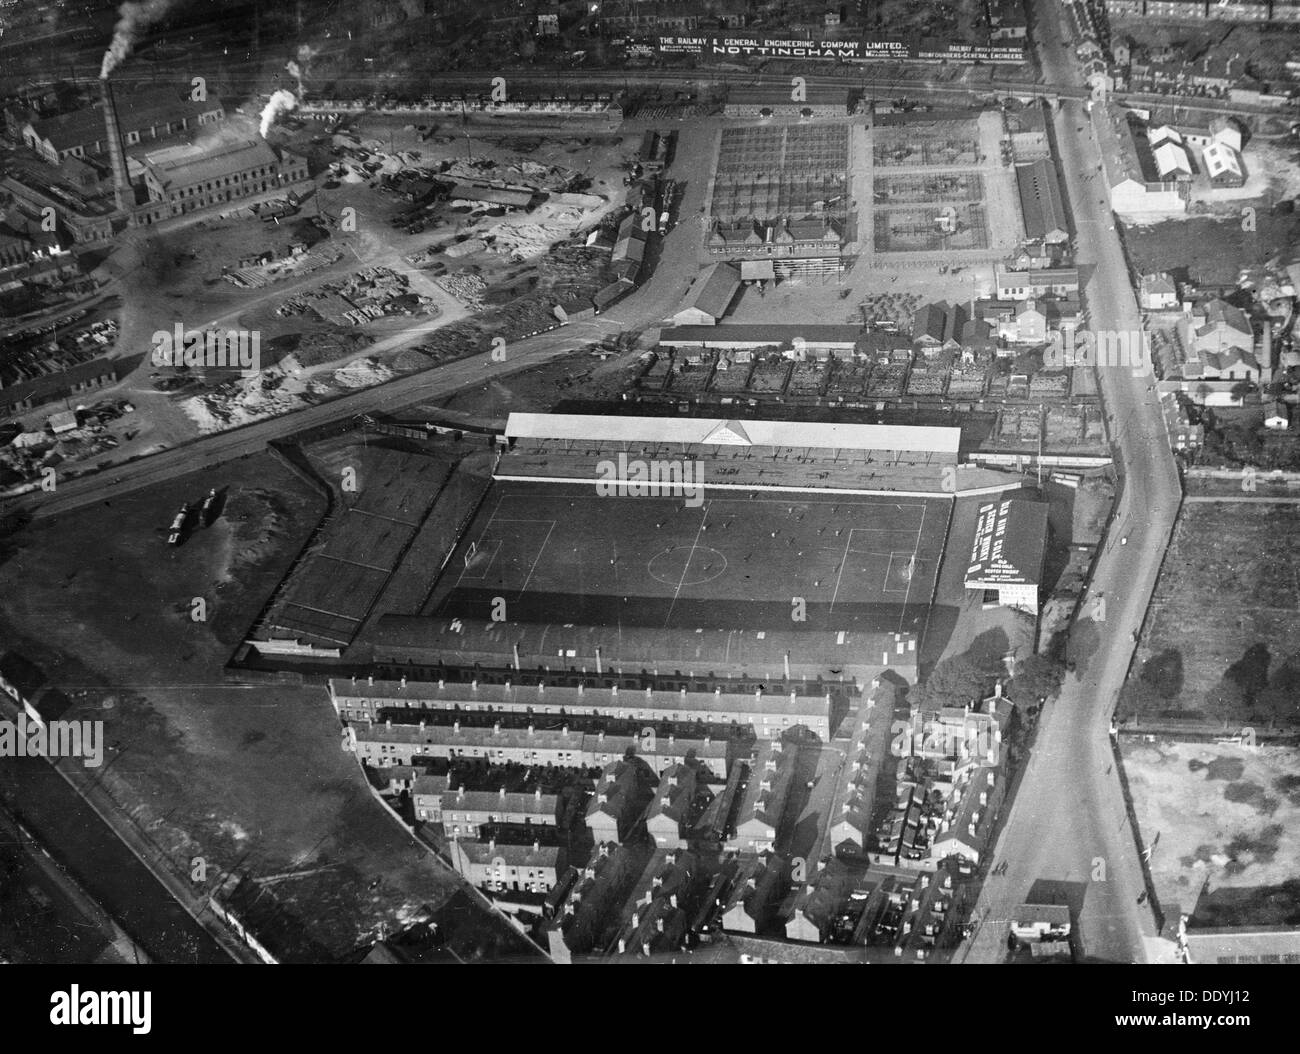 Notts County football ground, Meadow Lane, Nottingham, Nottinghamshire, 1927. Artist: Surrey Flying Services Stock Photo